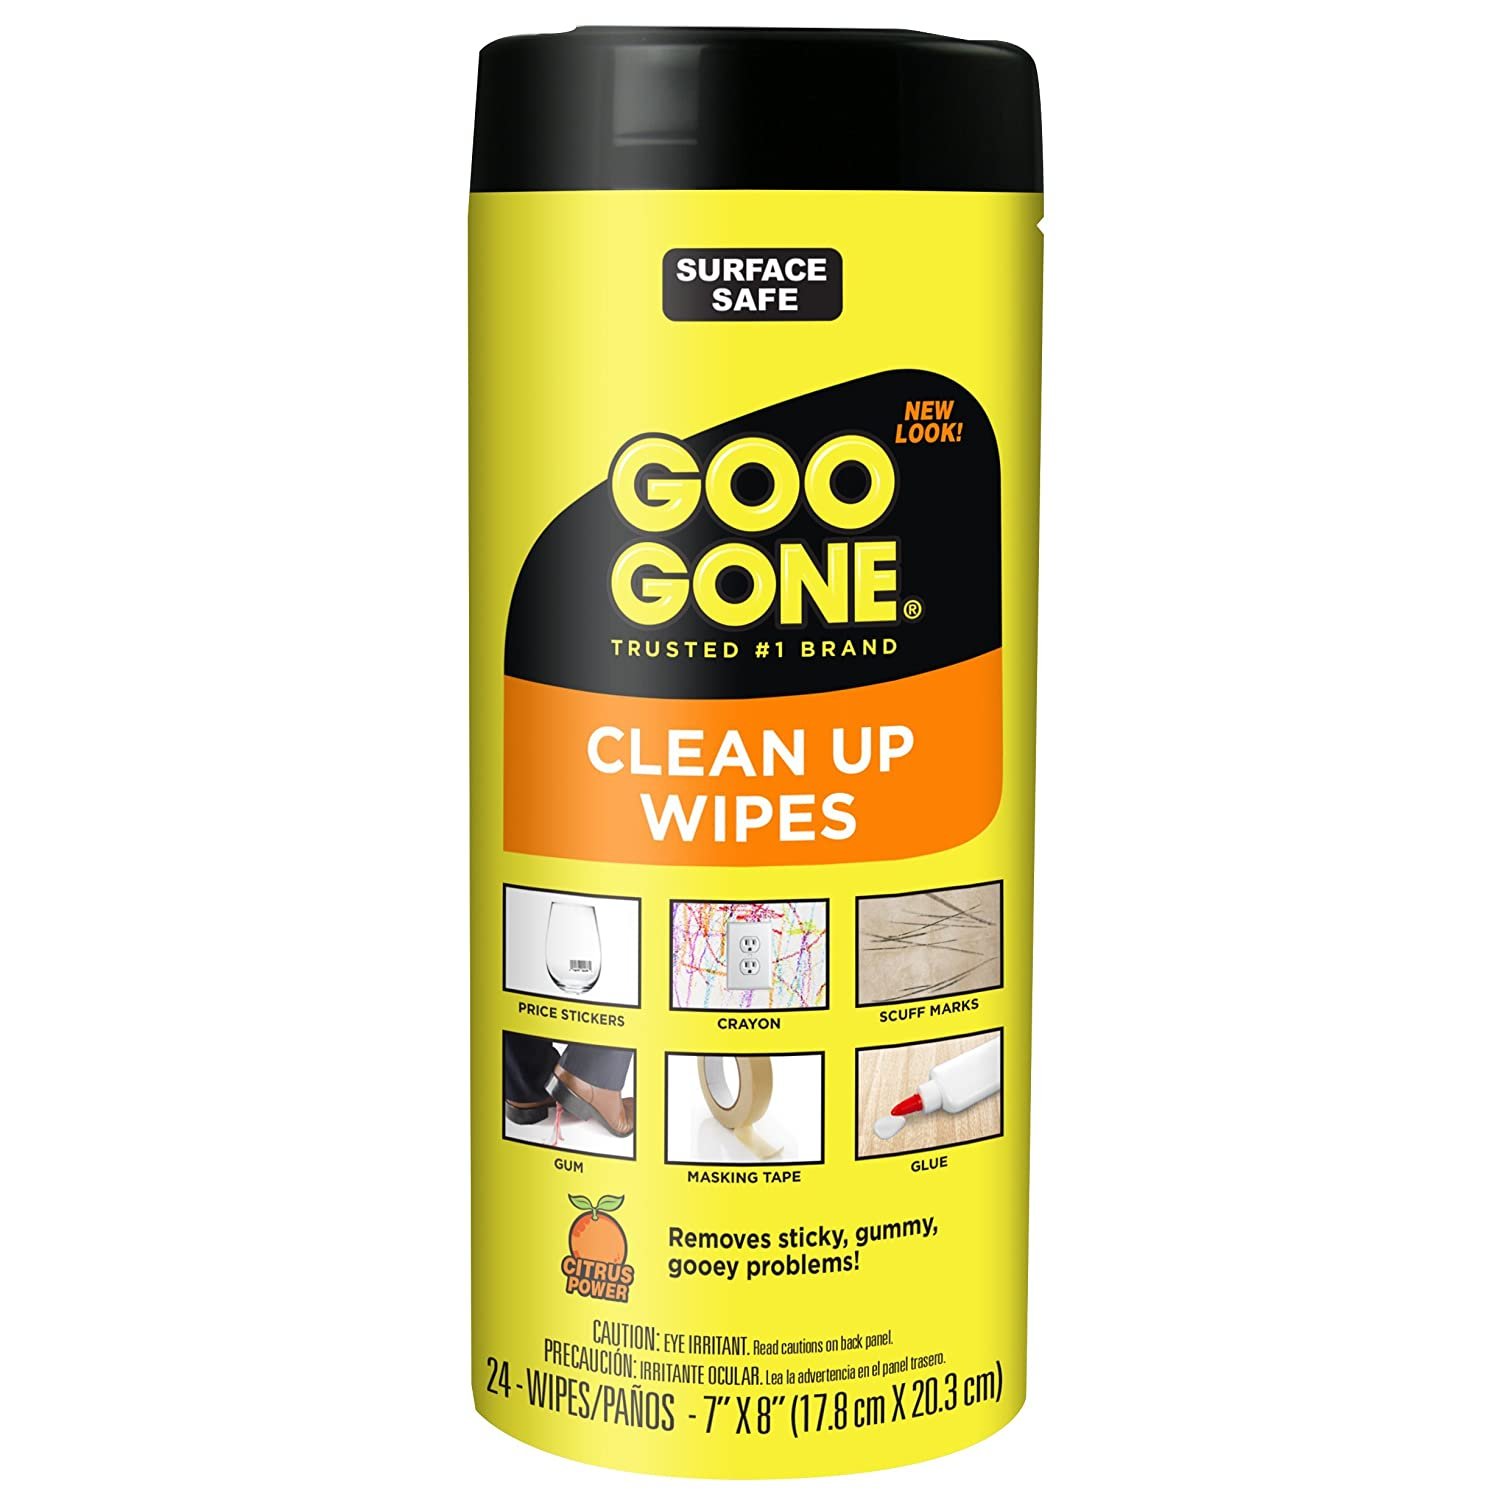 Goo Gone Clean Up Wipes Adhesive Remover - 24 Count - Removes Adhesive Residue Labels Stickers Crayon Tree Sap Gum Masking Tape Glue and More, Size